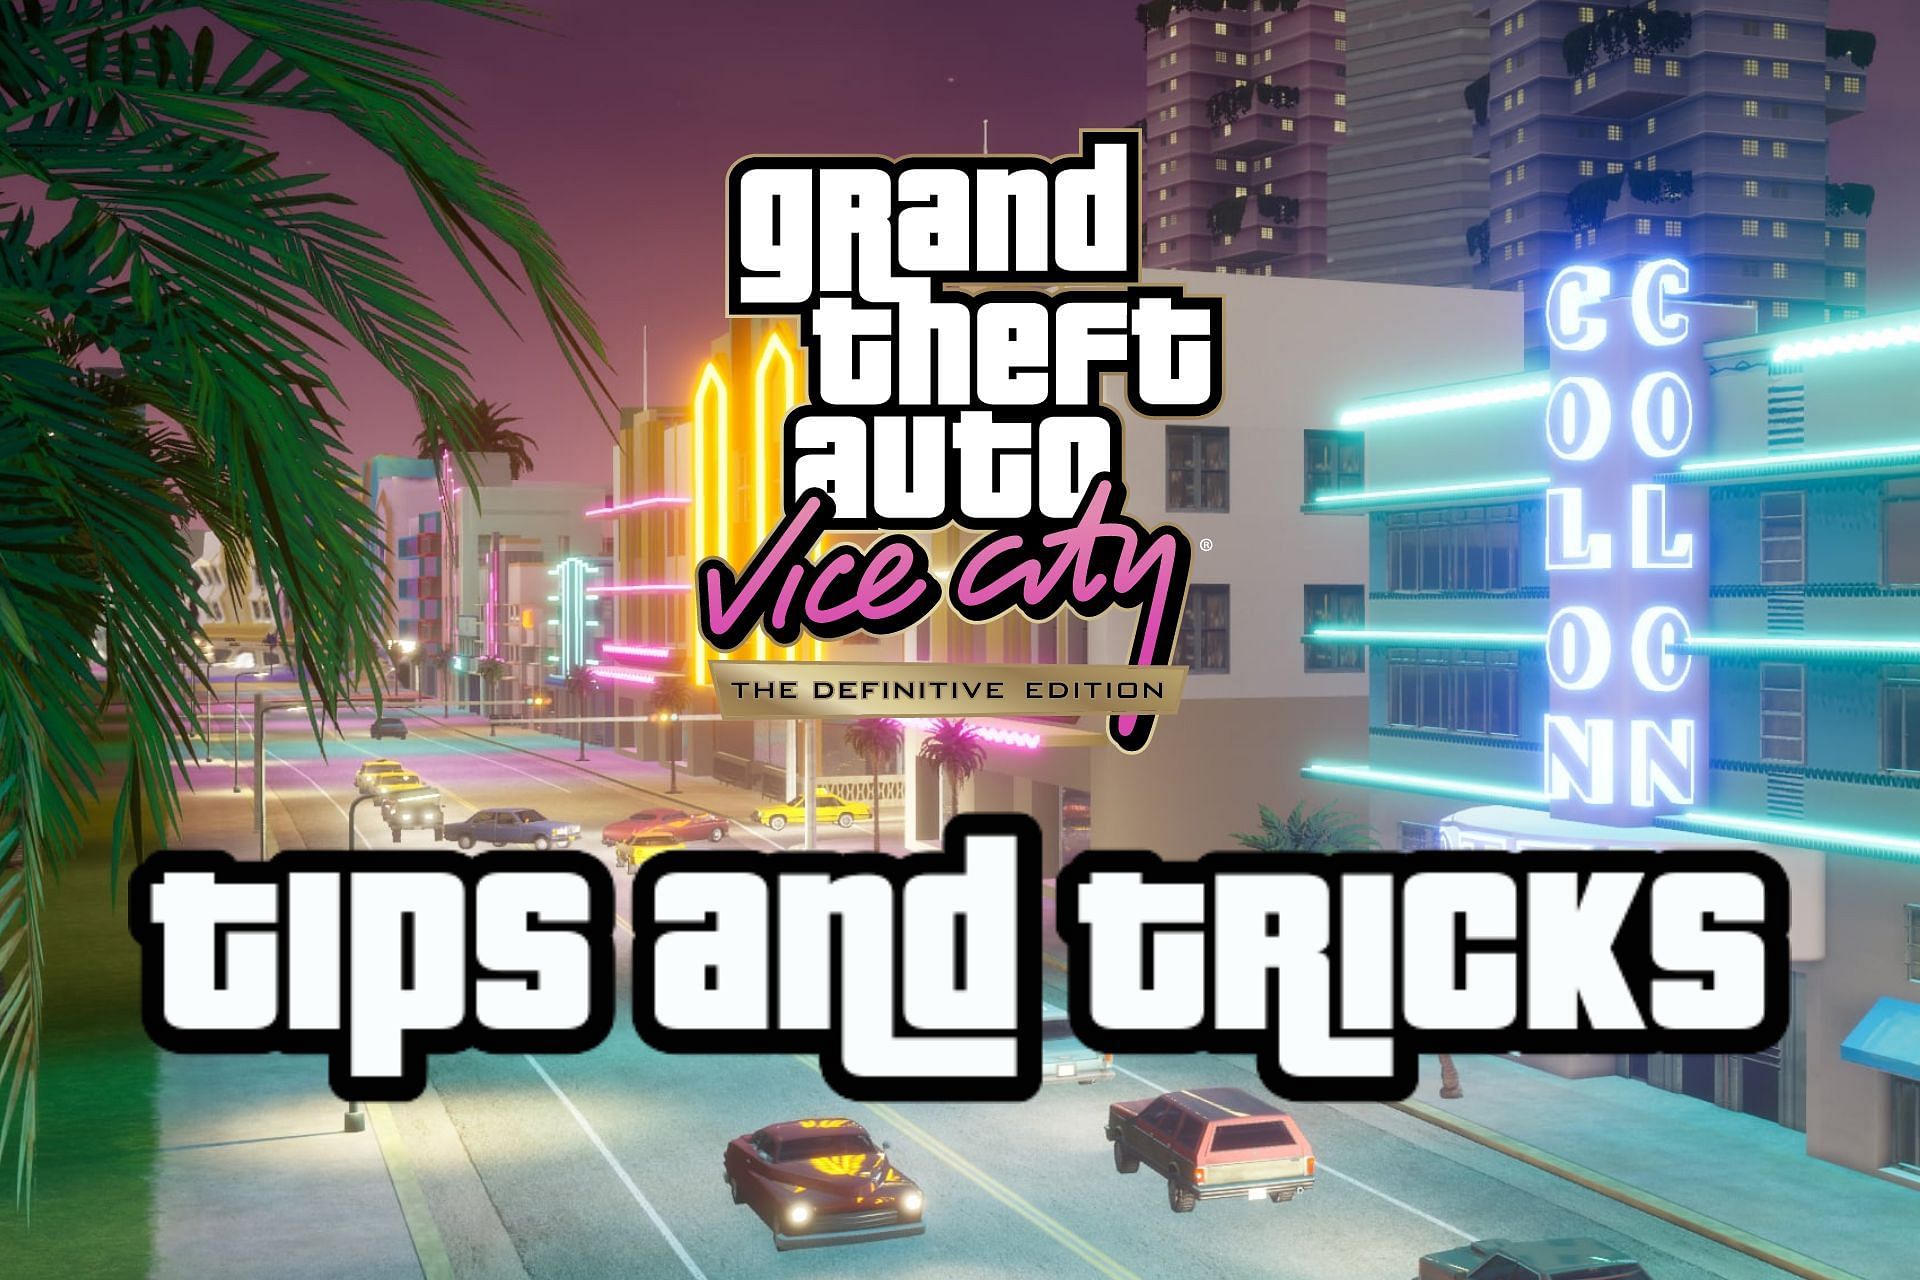 Five tips and tricks for GTA Vice City Definitive Edition (Image via Rockstar Games)